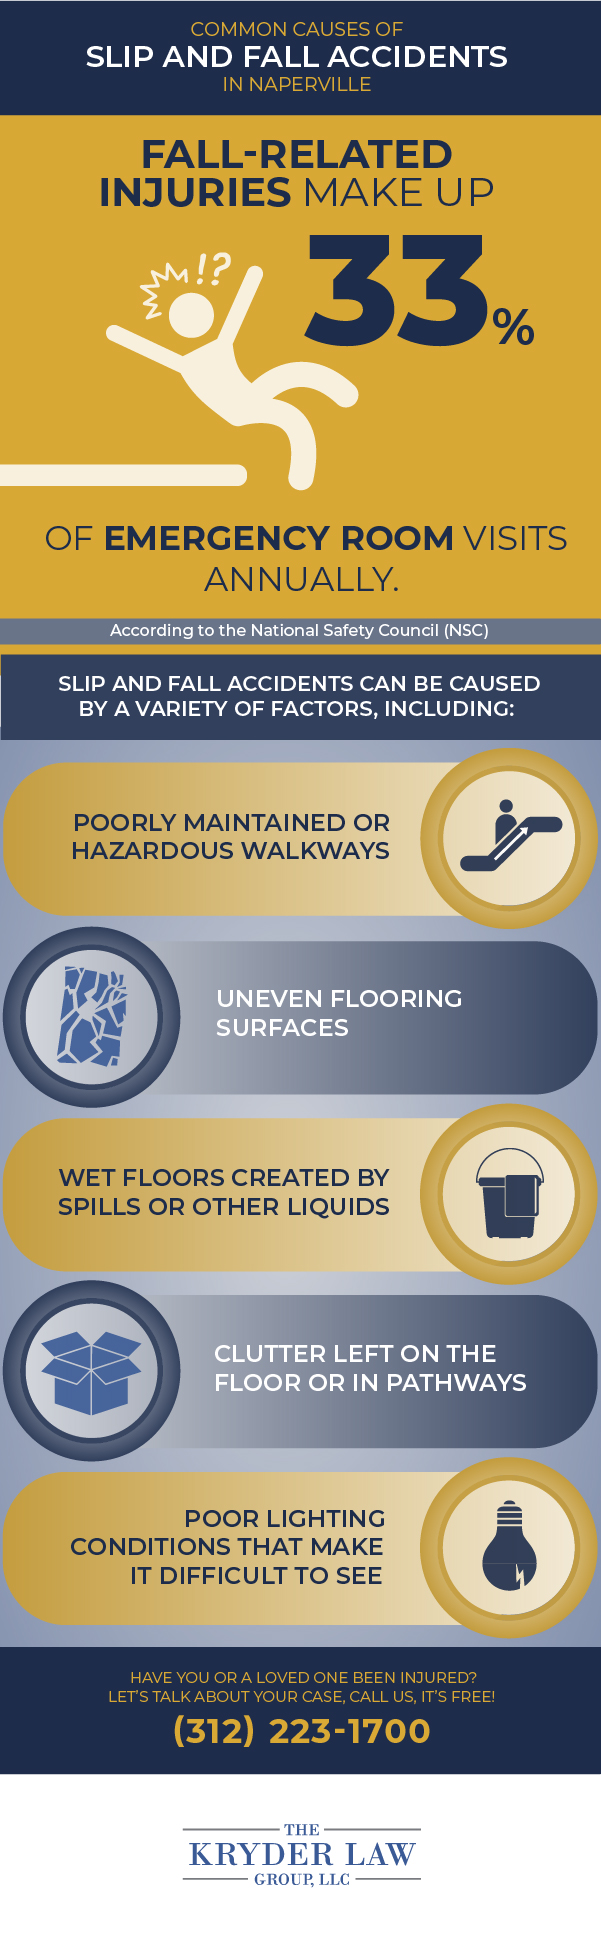 Common Causes of Slip and Fall Accidents in Naperville